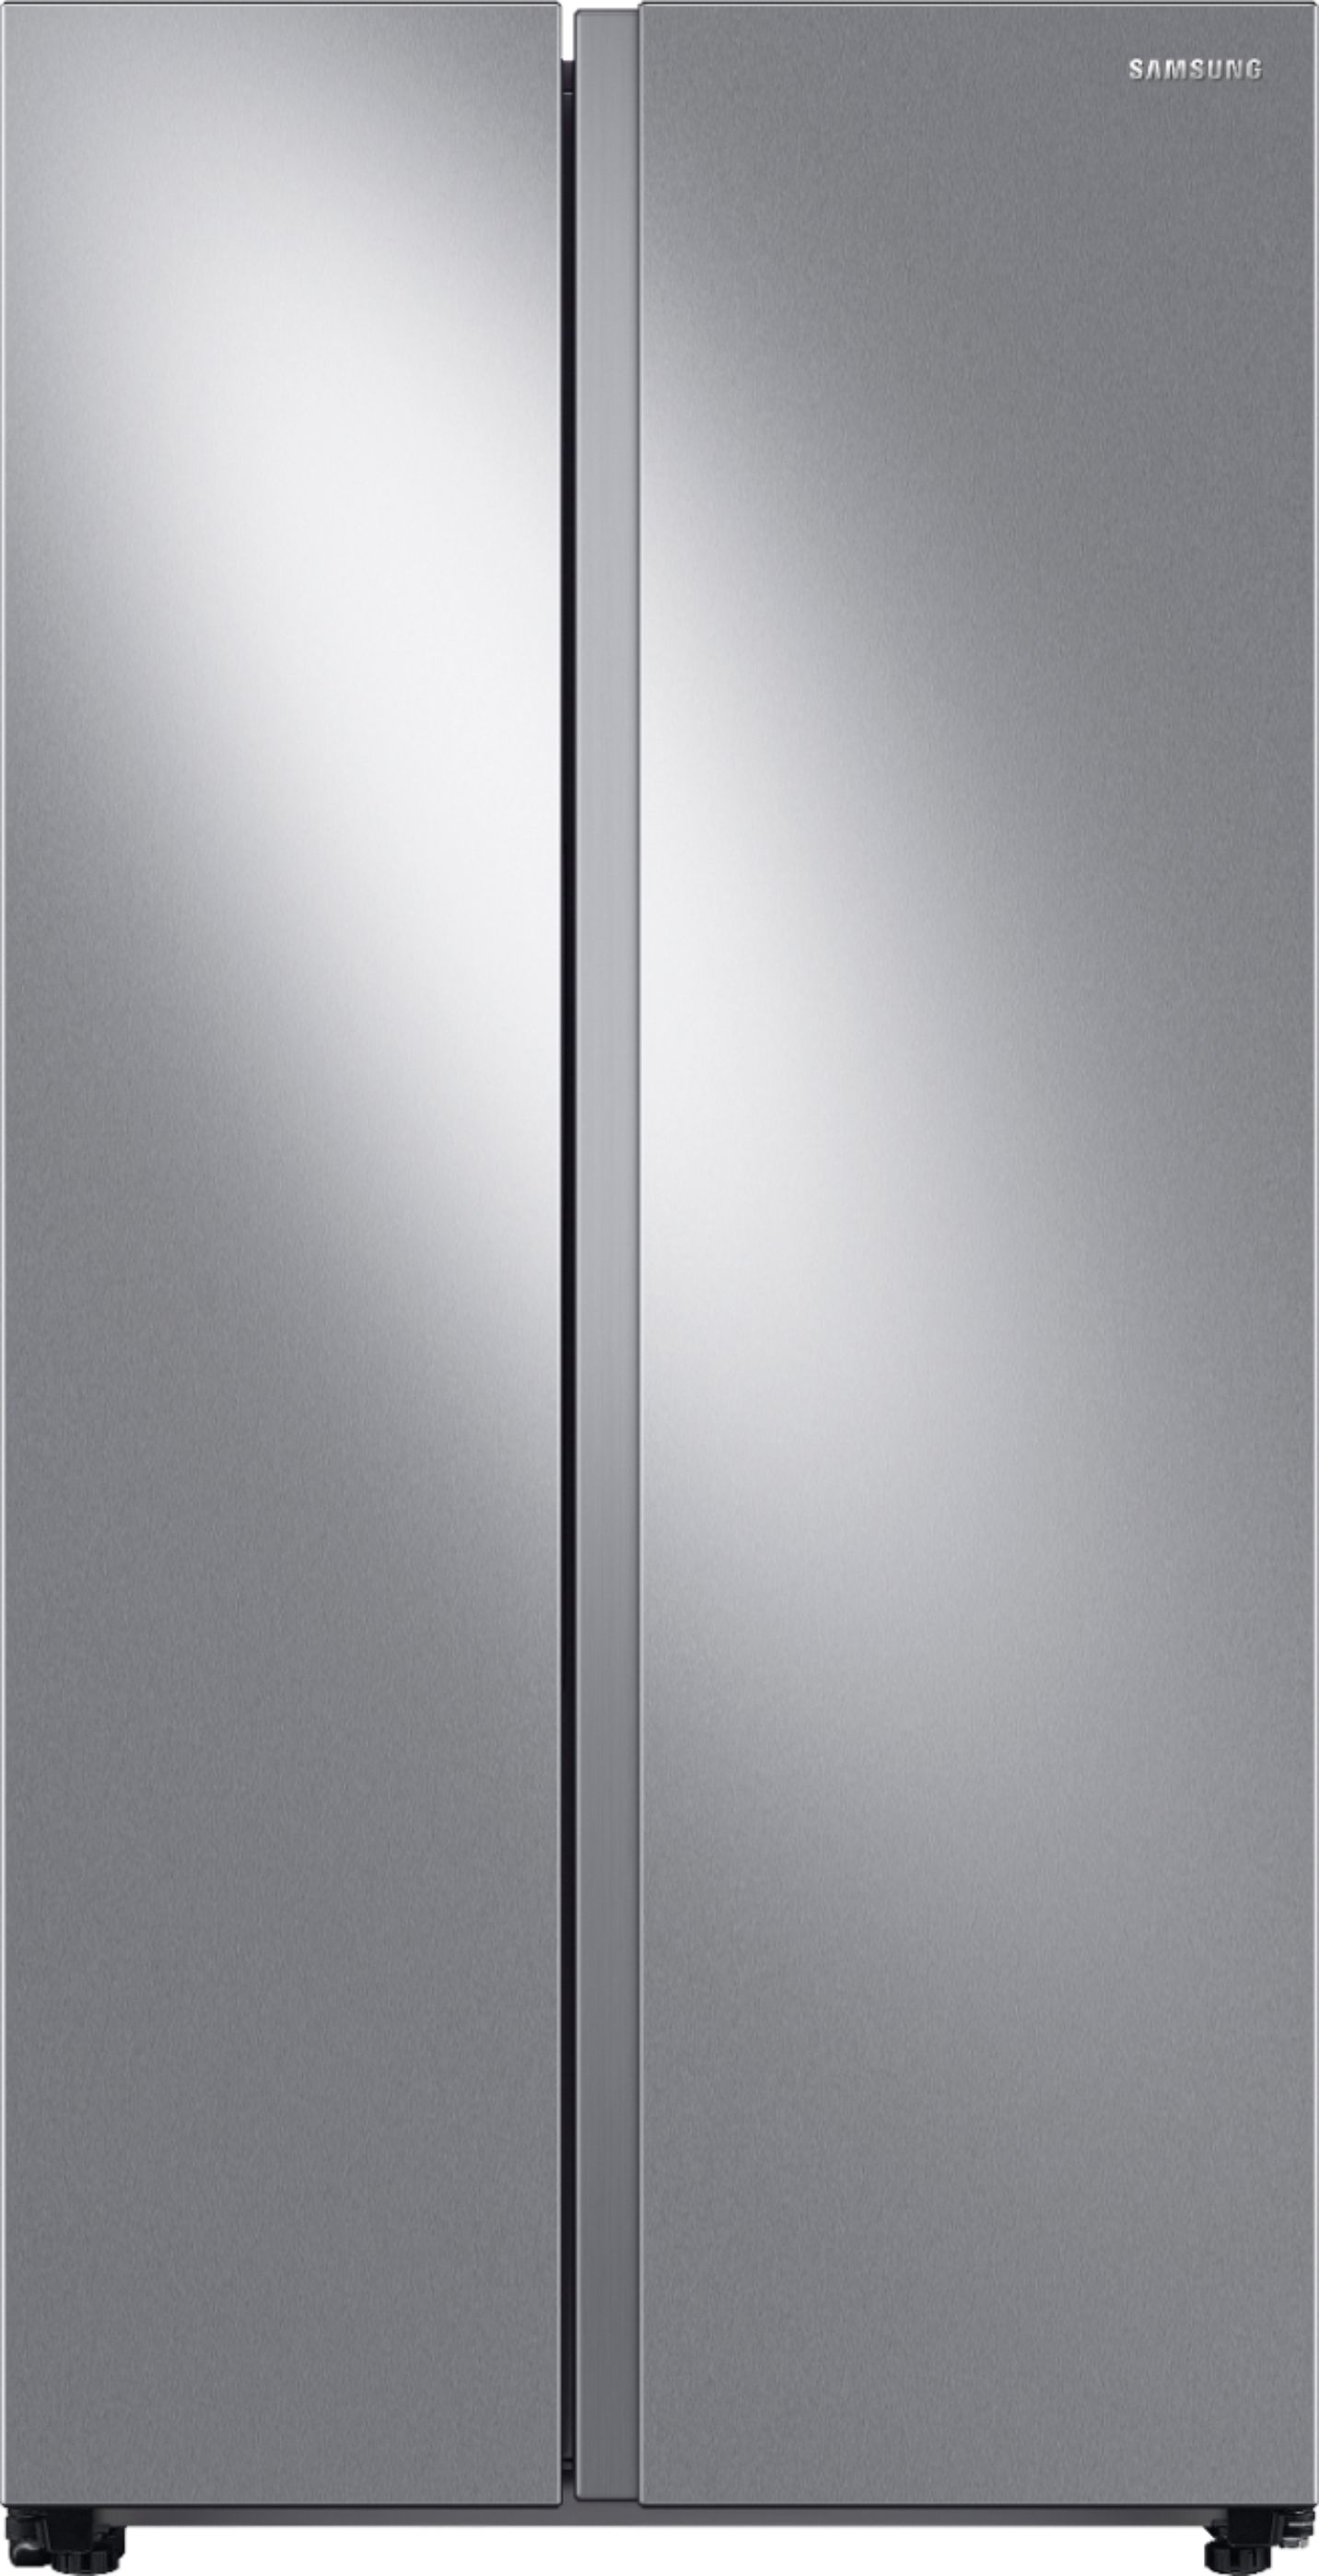 Samsung – 23 cu. ft. Counter Depth Side-by-Side Refrigerator with WiFi and All-Around Cooling – Stainless steel